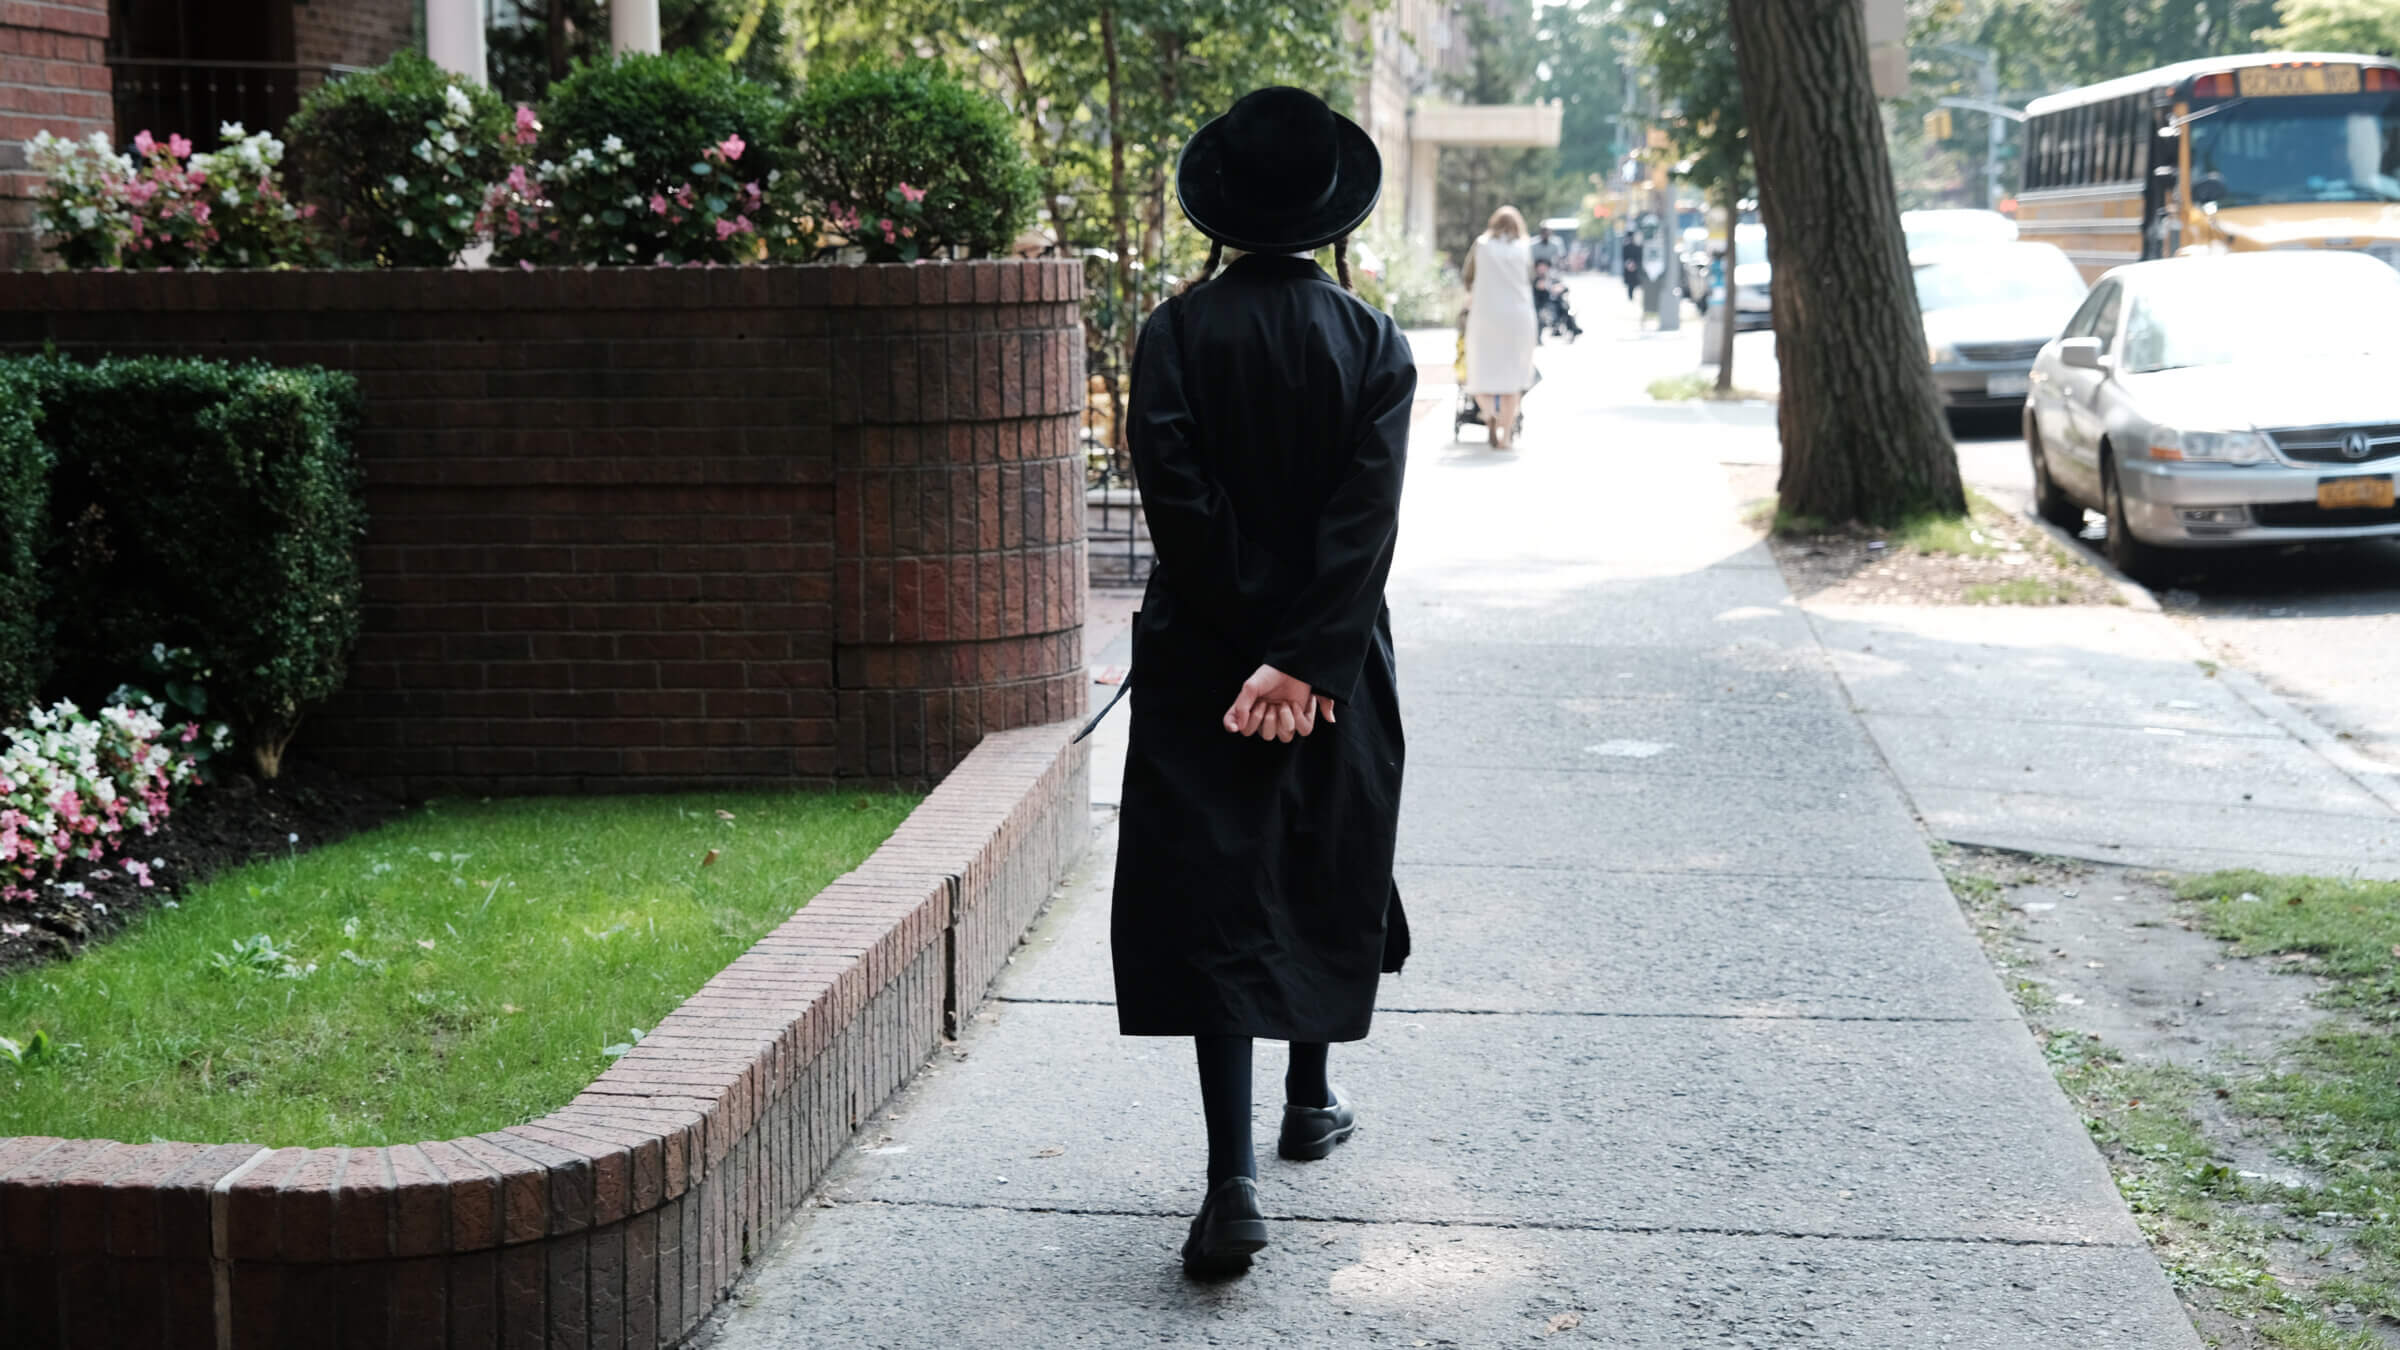 An orthodox Jewish boy walks down a street outside of a yeshiva school in Borough Park on September 12, 2022.